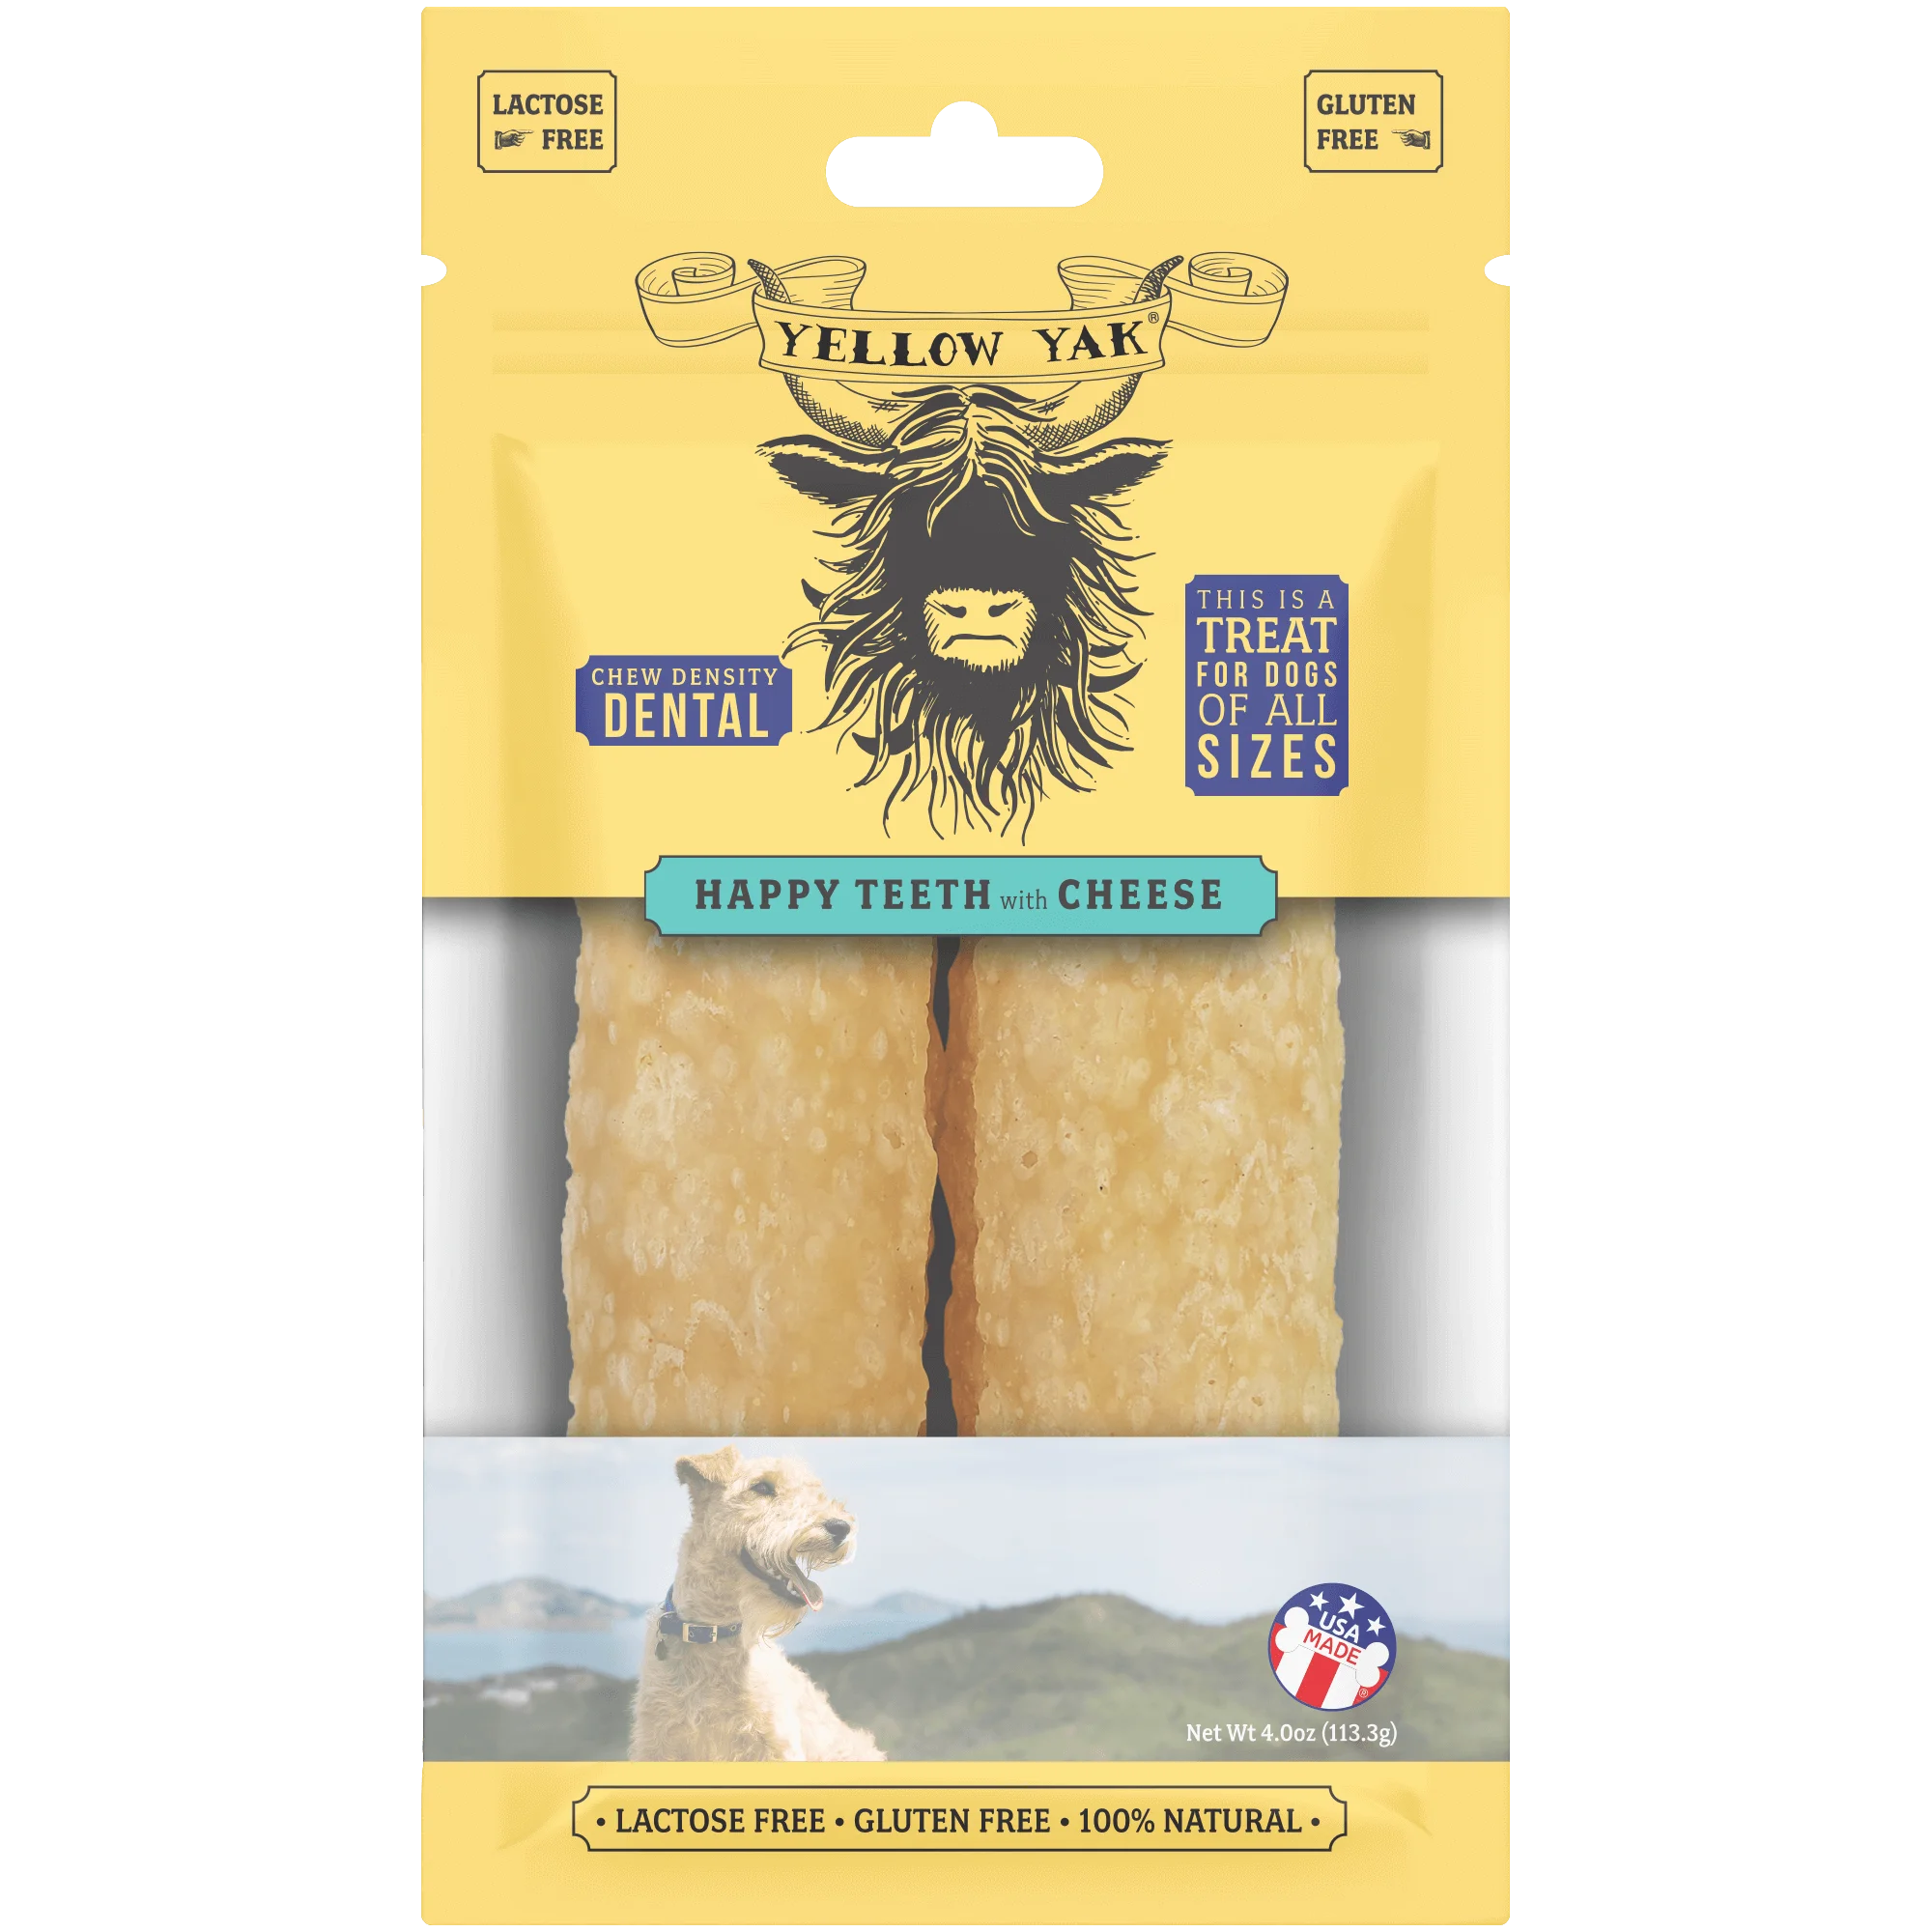 Dental Chew with Cheese - Front of consumer packaging